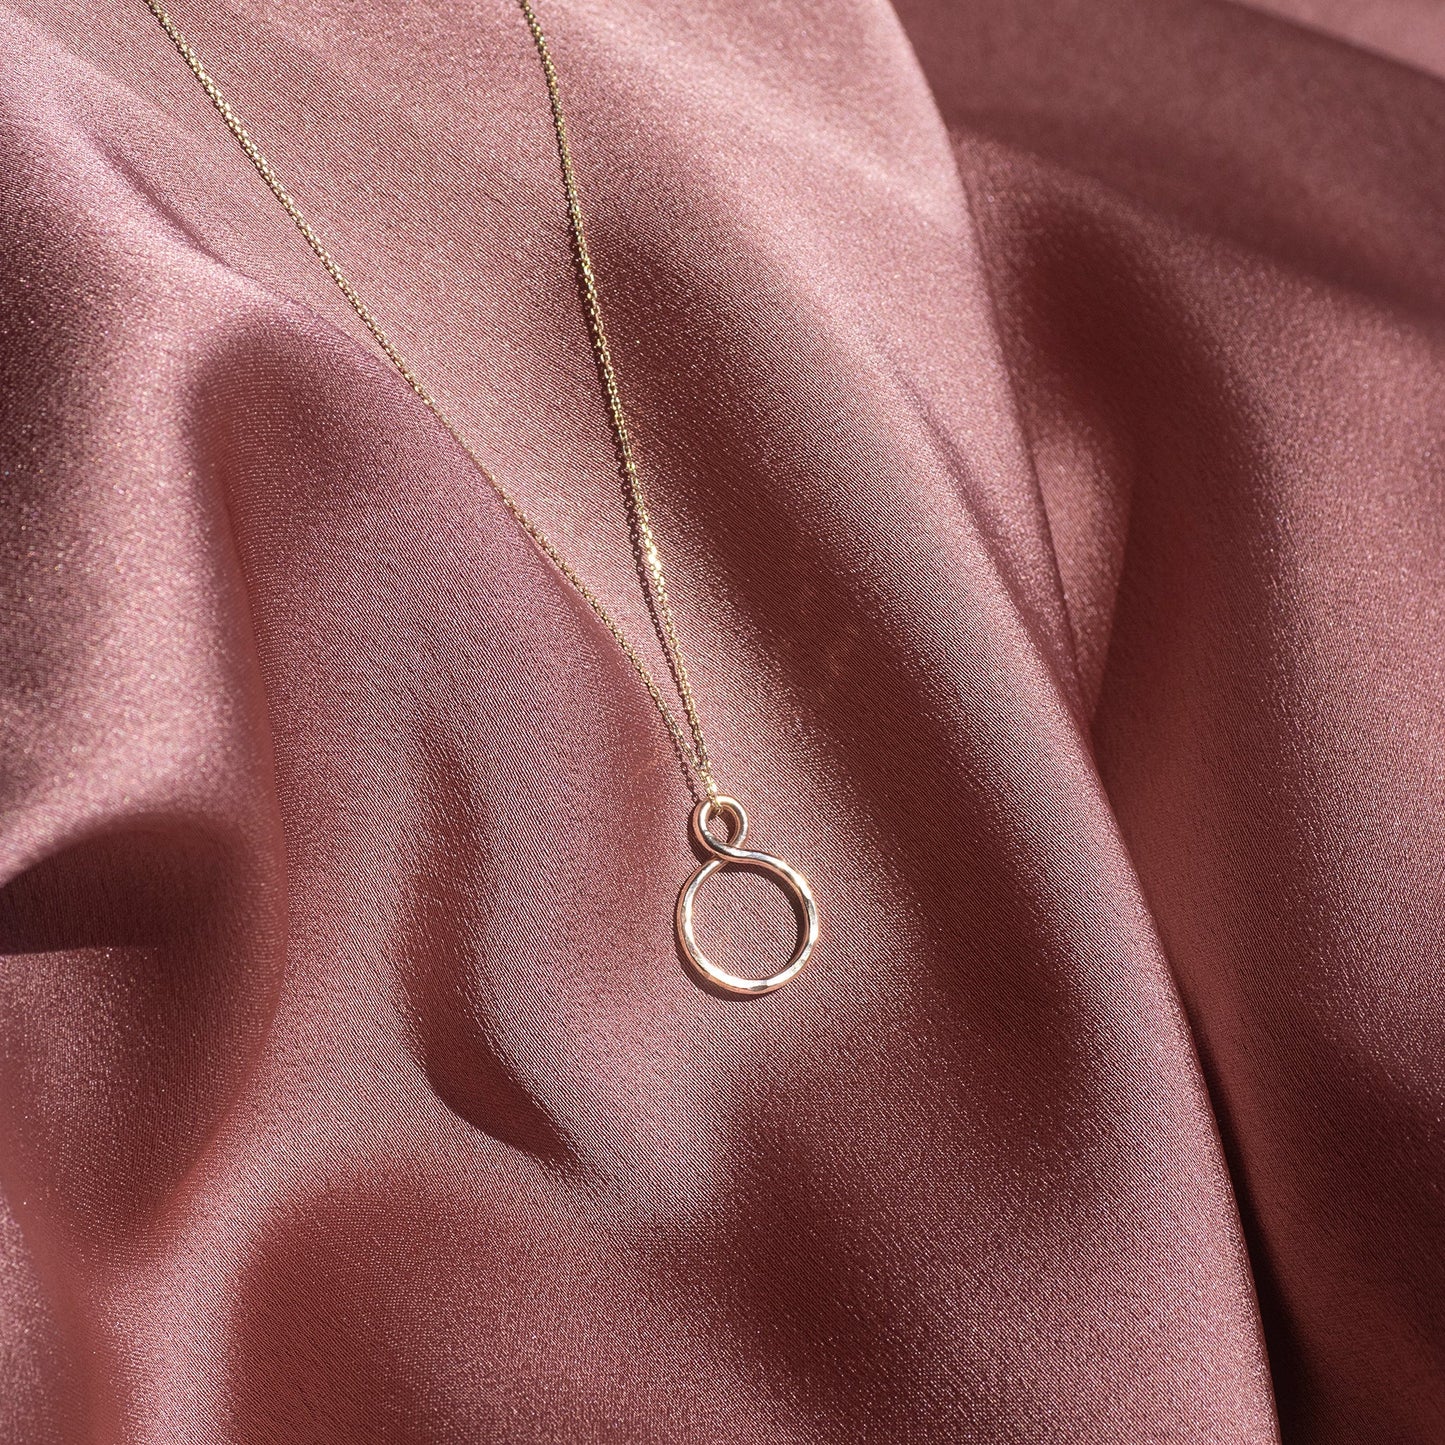 Gift for Goddaughter - Petite Infinity Necklace - 9kt Gold